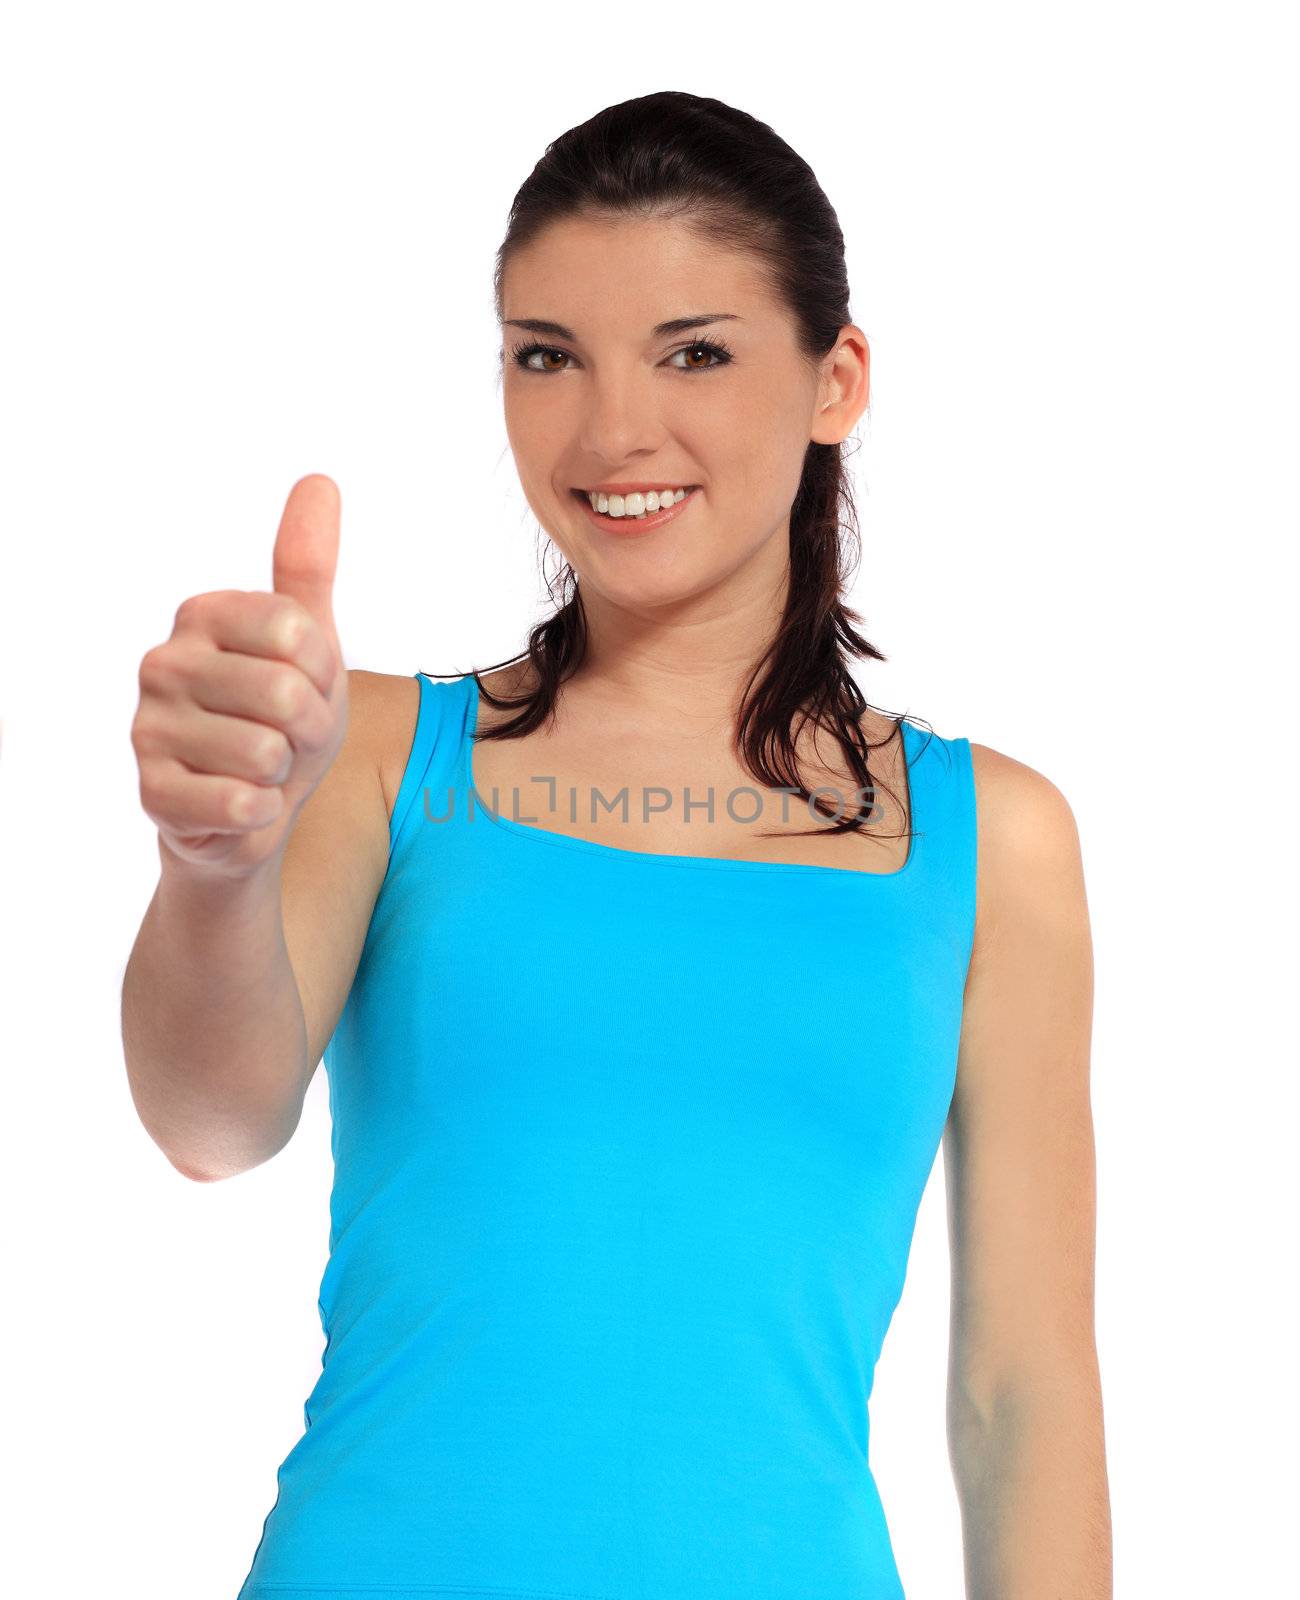 Attractive young woman making positive gesture. All on white background.